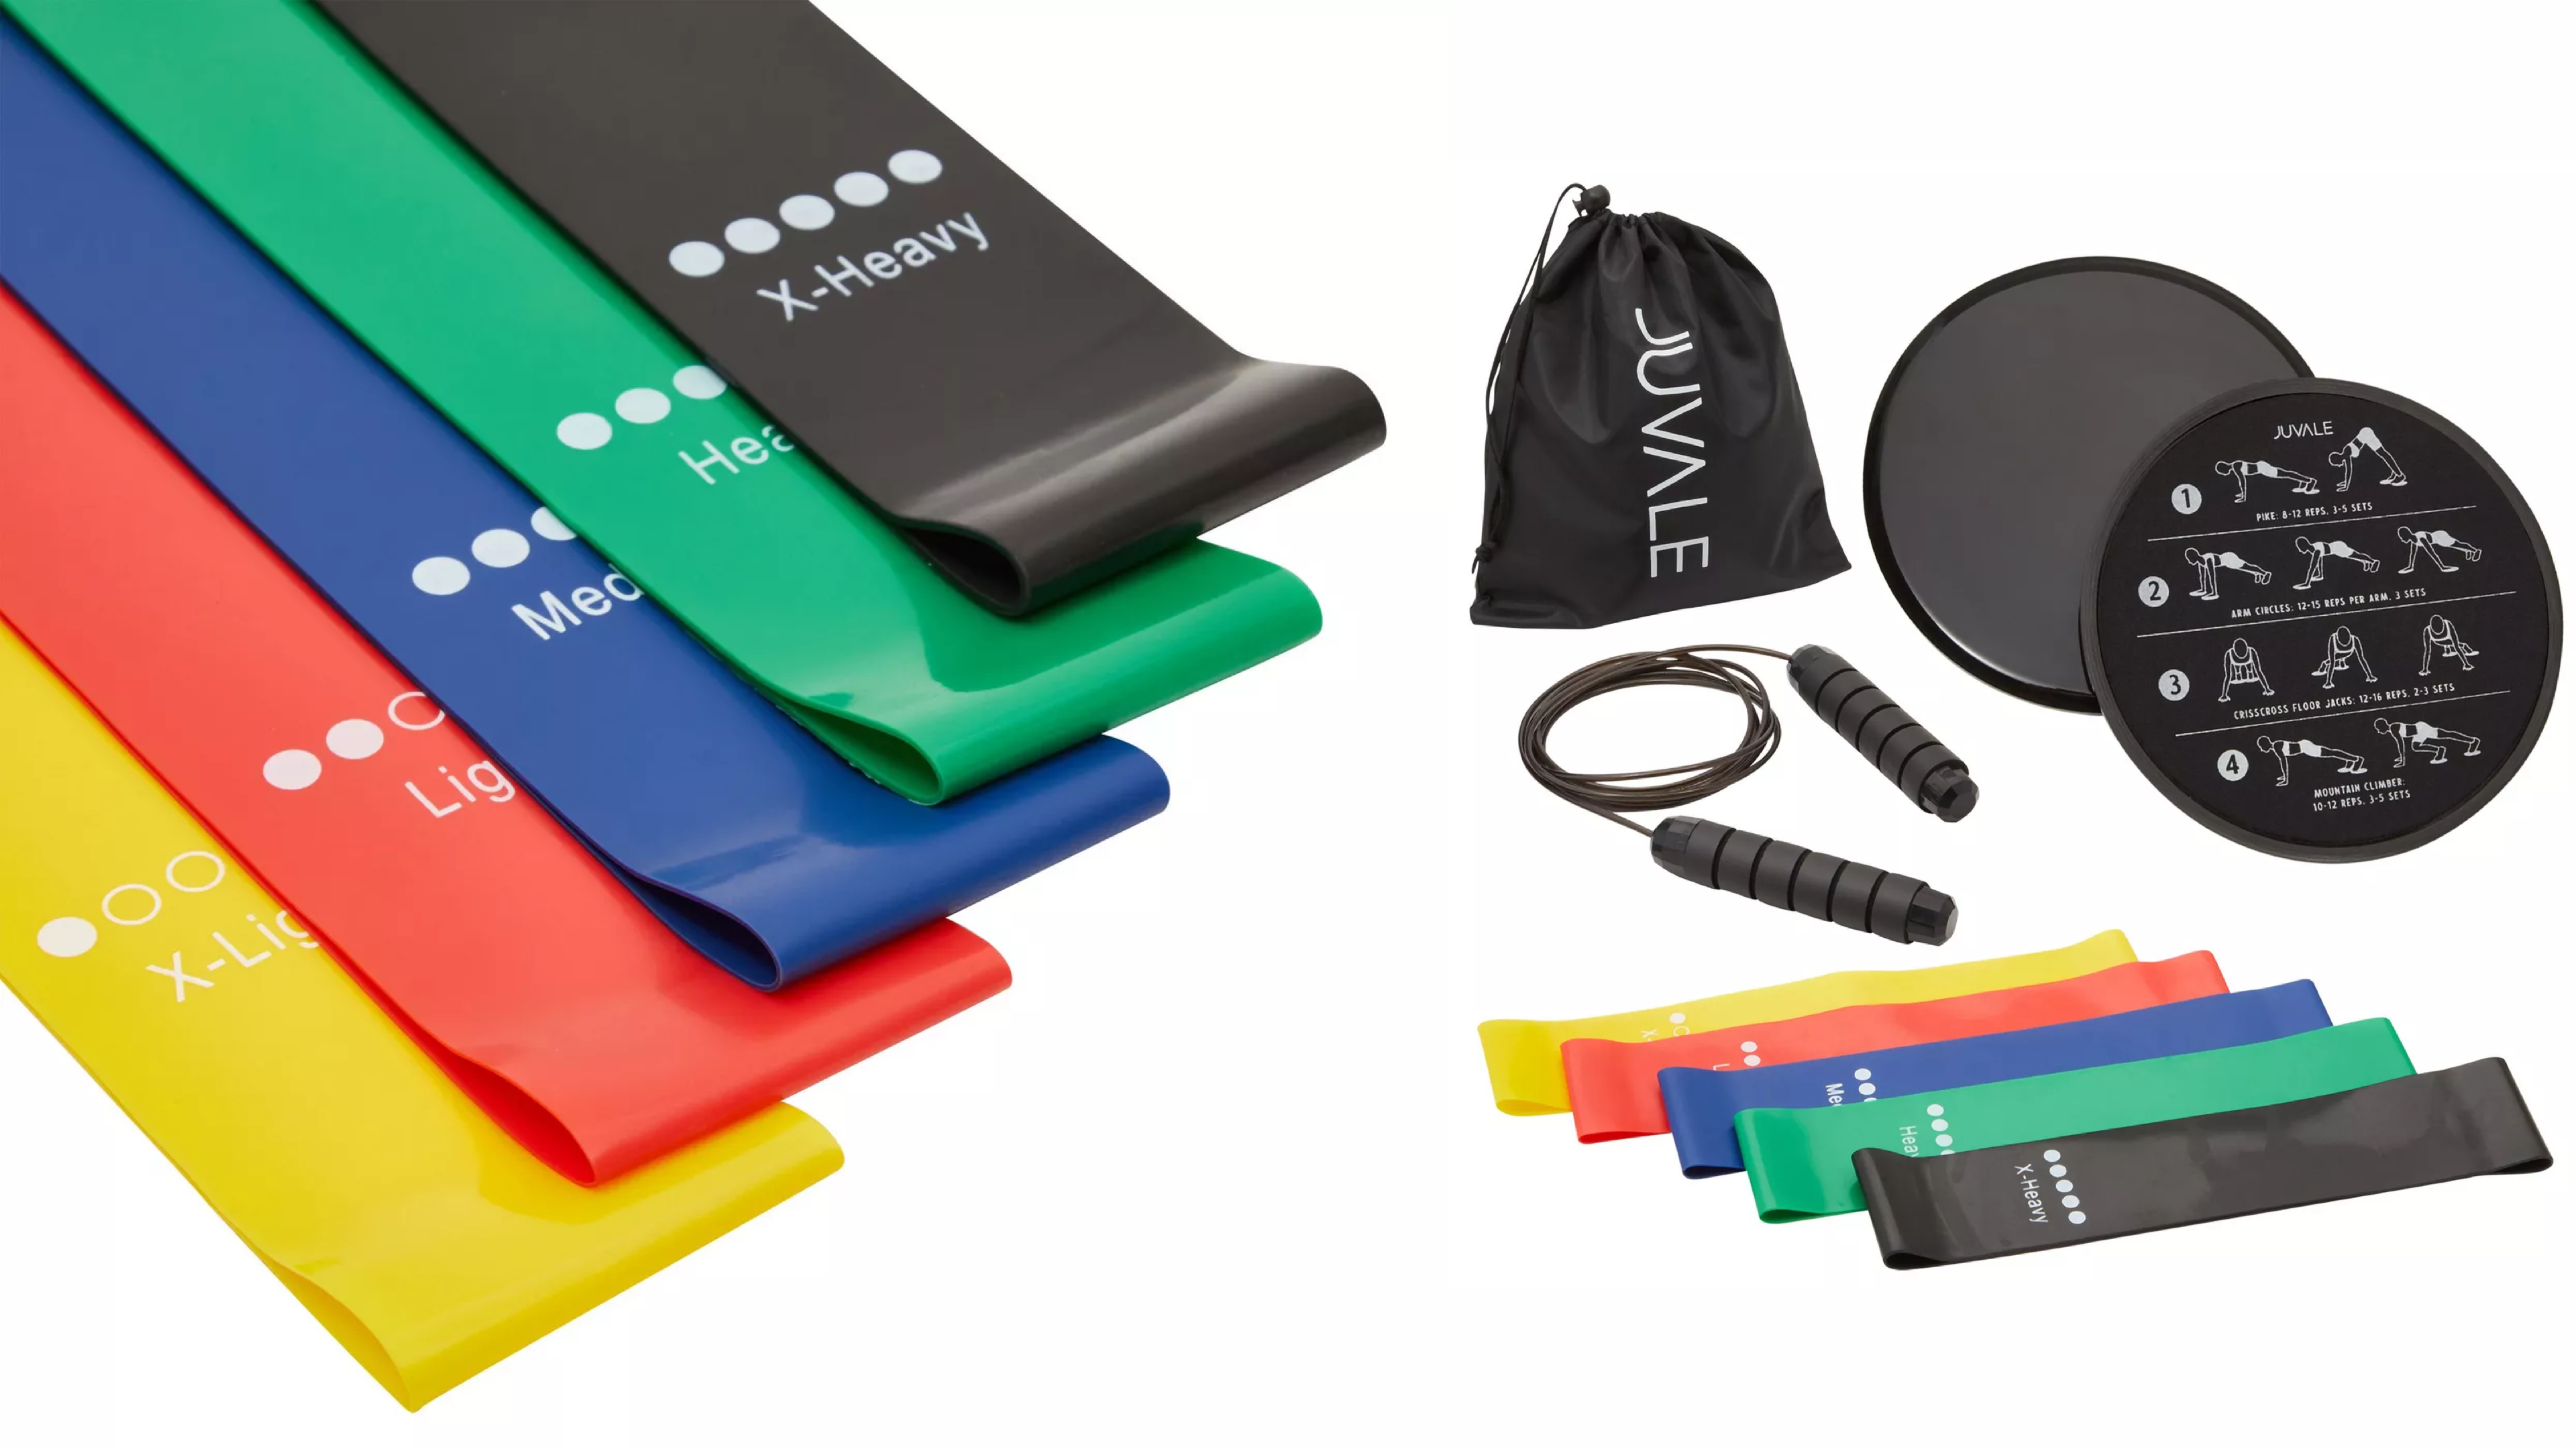 gym starter kit with resistance bands, a jump rope, and disc sliders